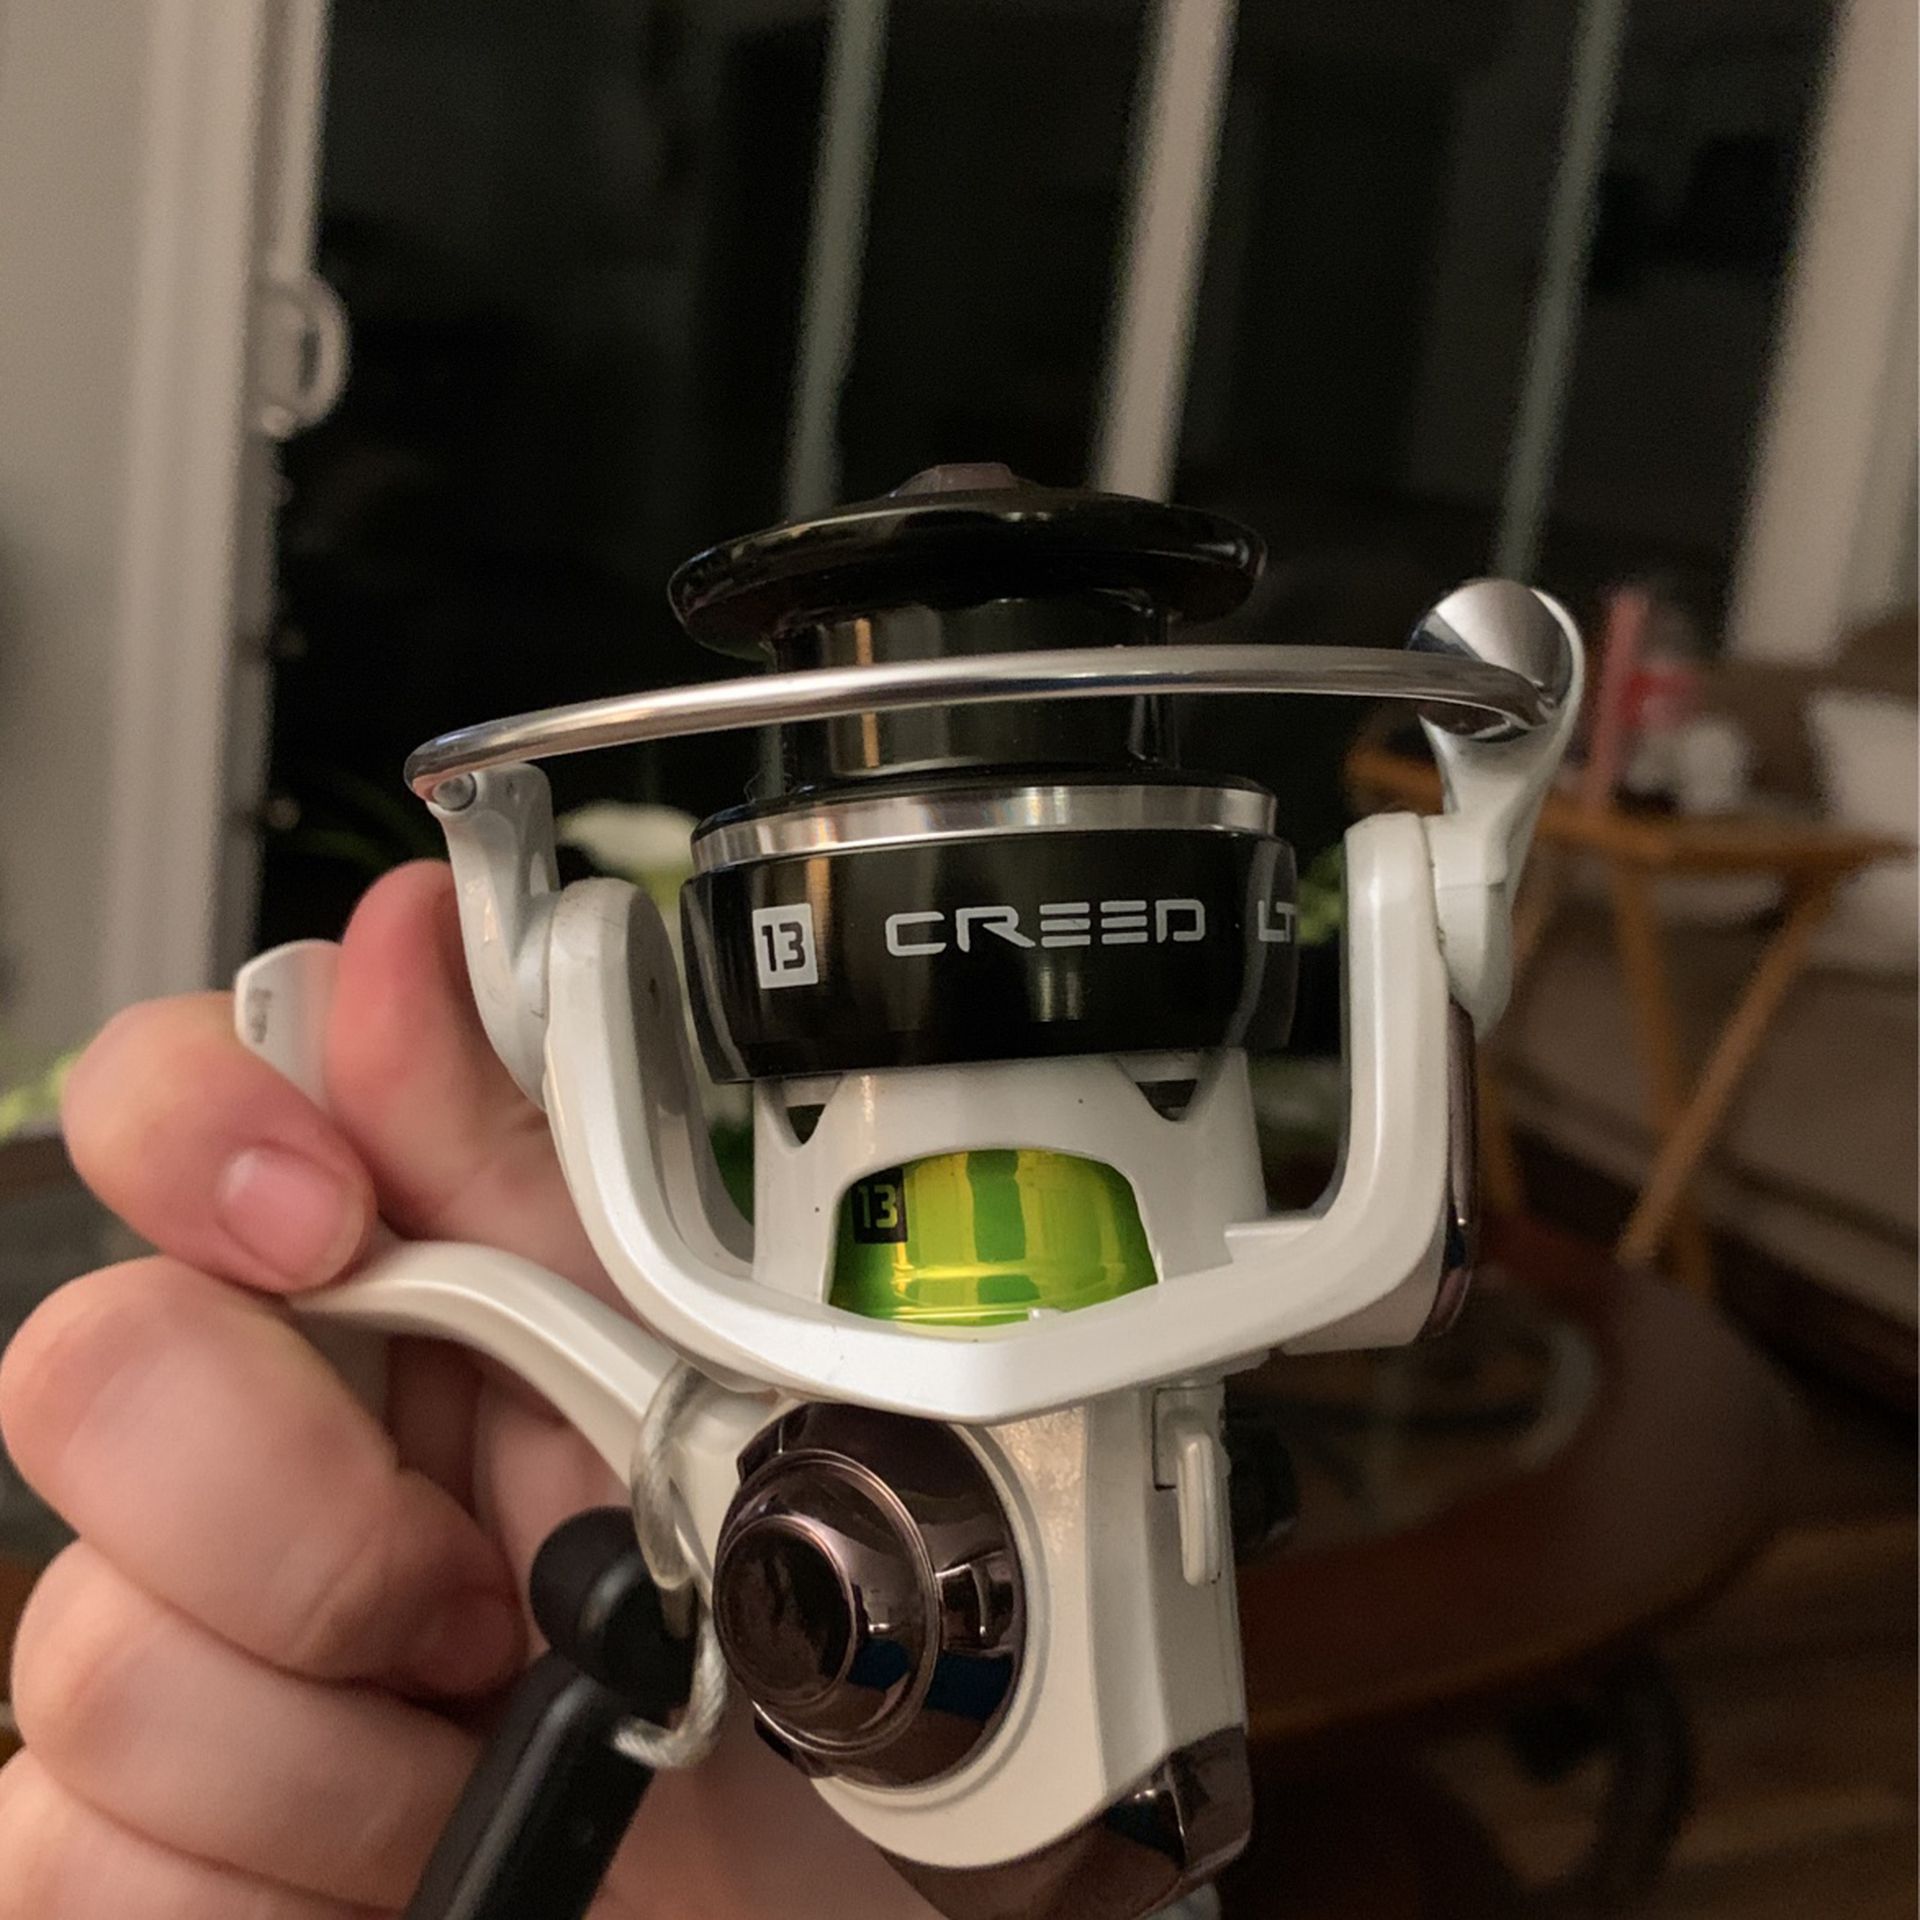 13 Fishing Creed LTE 2000 Spinning Reel 